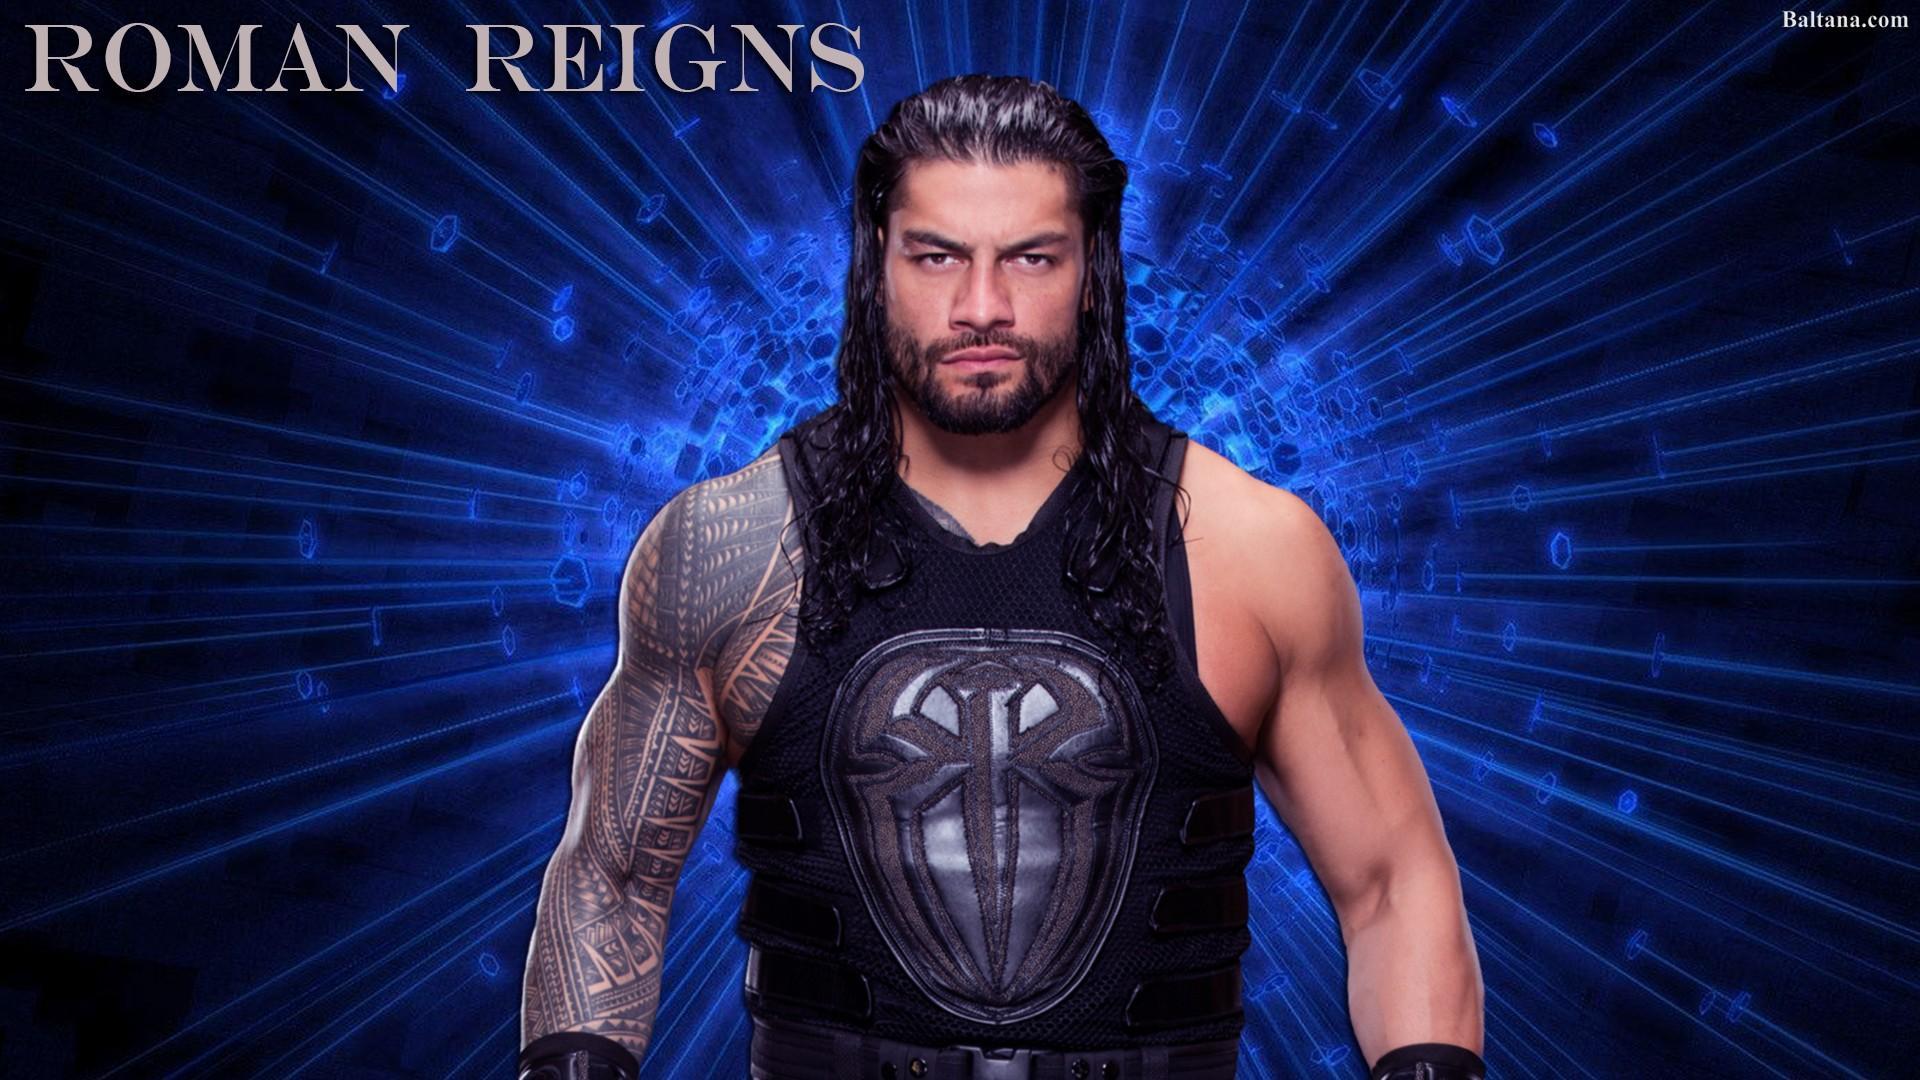 Roman Reigns Wallpapers Top Free Roman Reigns Backgrounds Wallpaperaccess